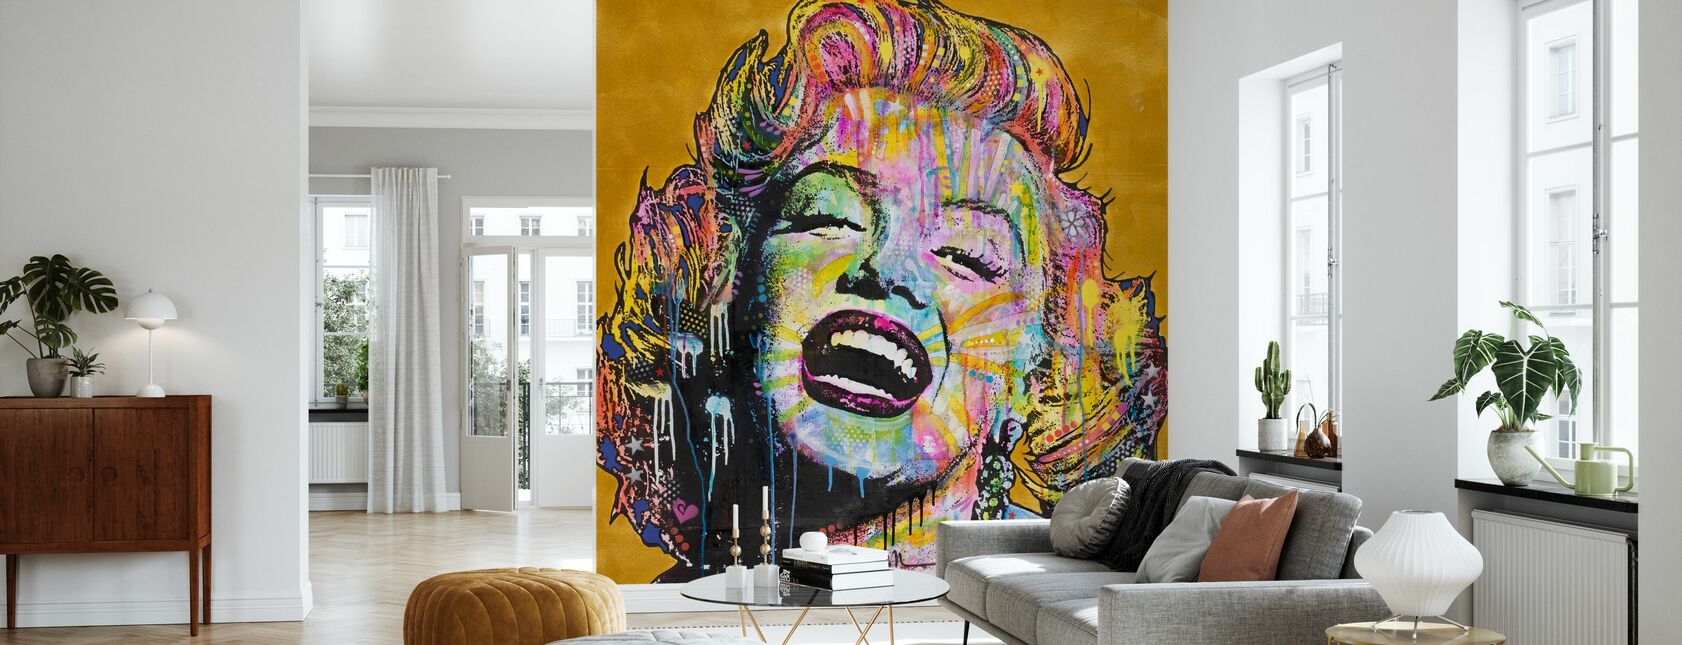 Marilyn Multicolor - Tapet - Stue